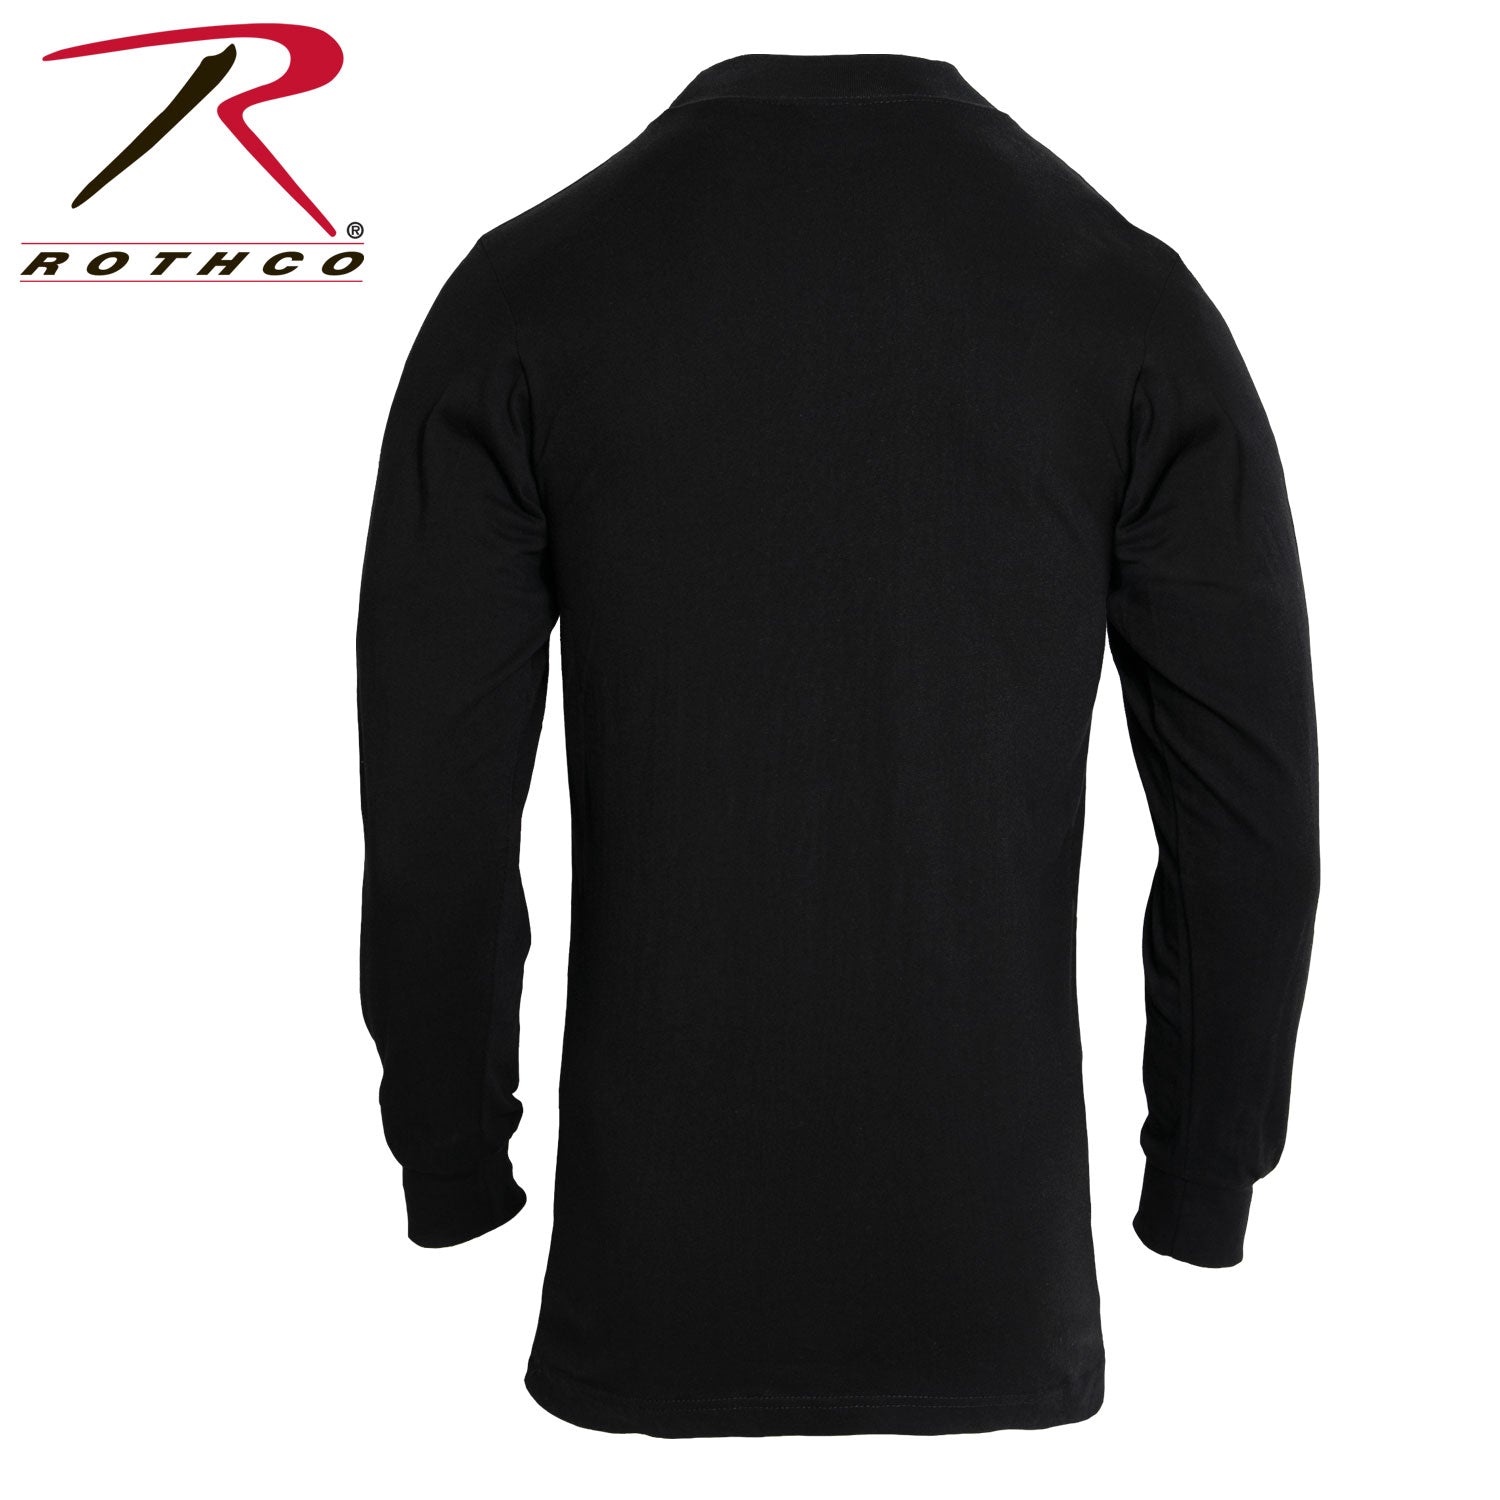 Rothco Security Mock Turtleneck - Tactical Choice Plus